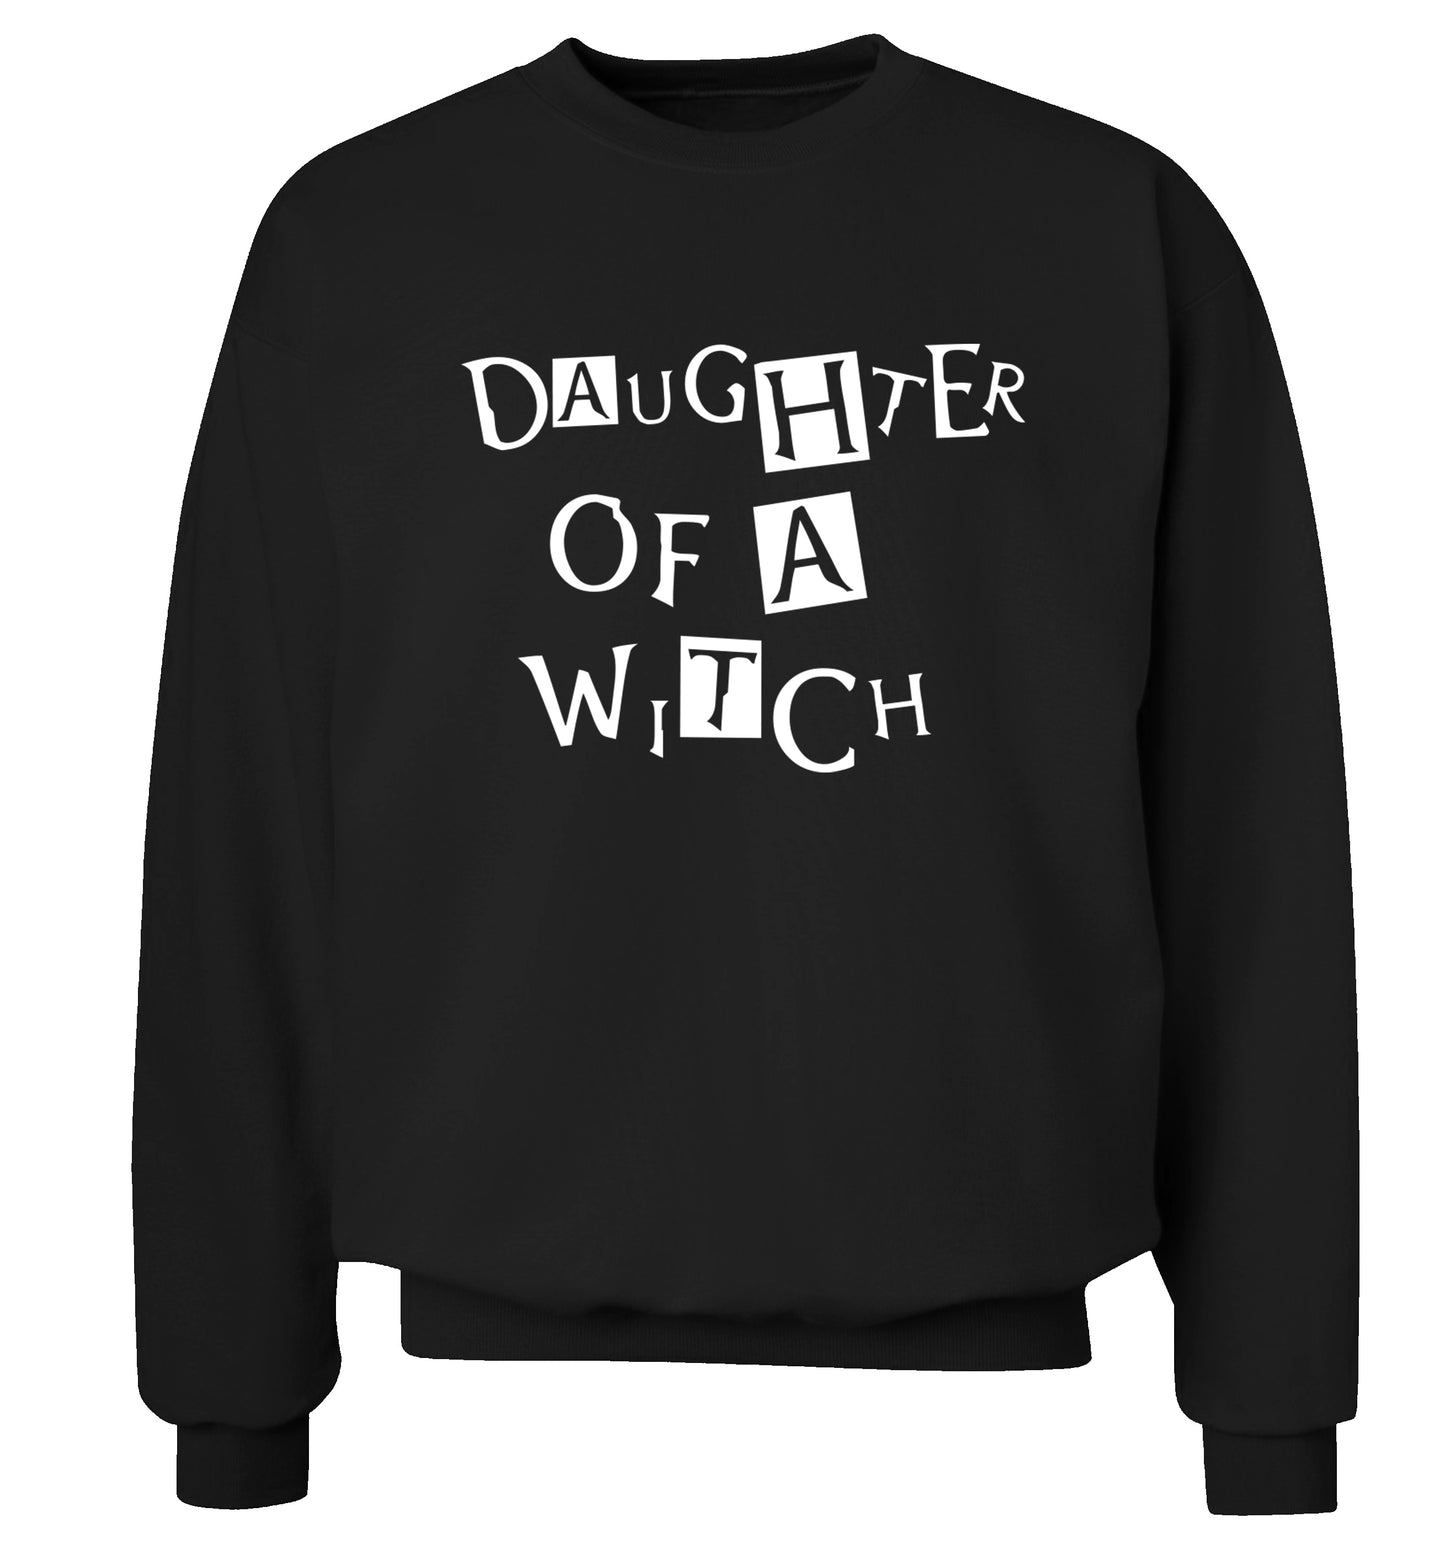 Daughter of a witch Adult's unisex black Sweater 2XL